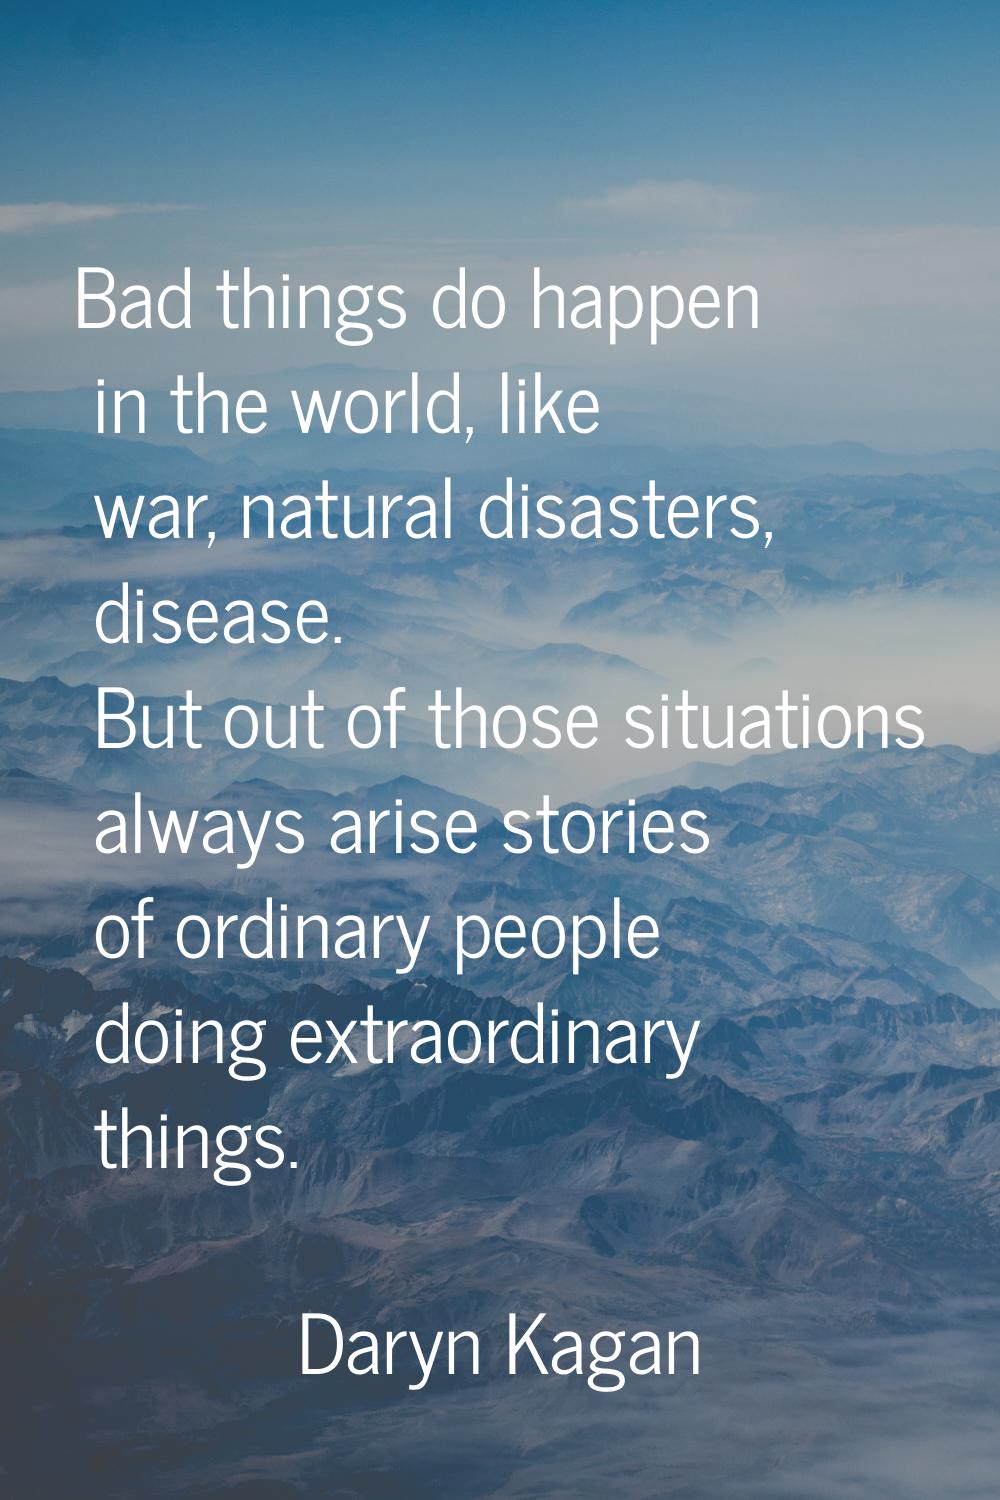 Bad things do happen in the world, like war, natural disasters, disease. But out of those situation